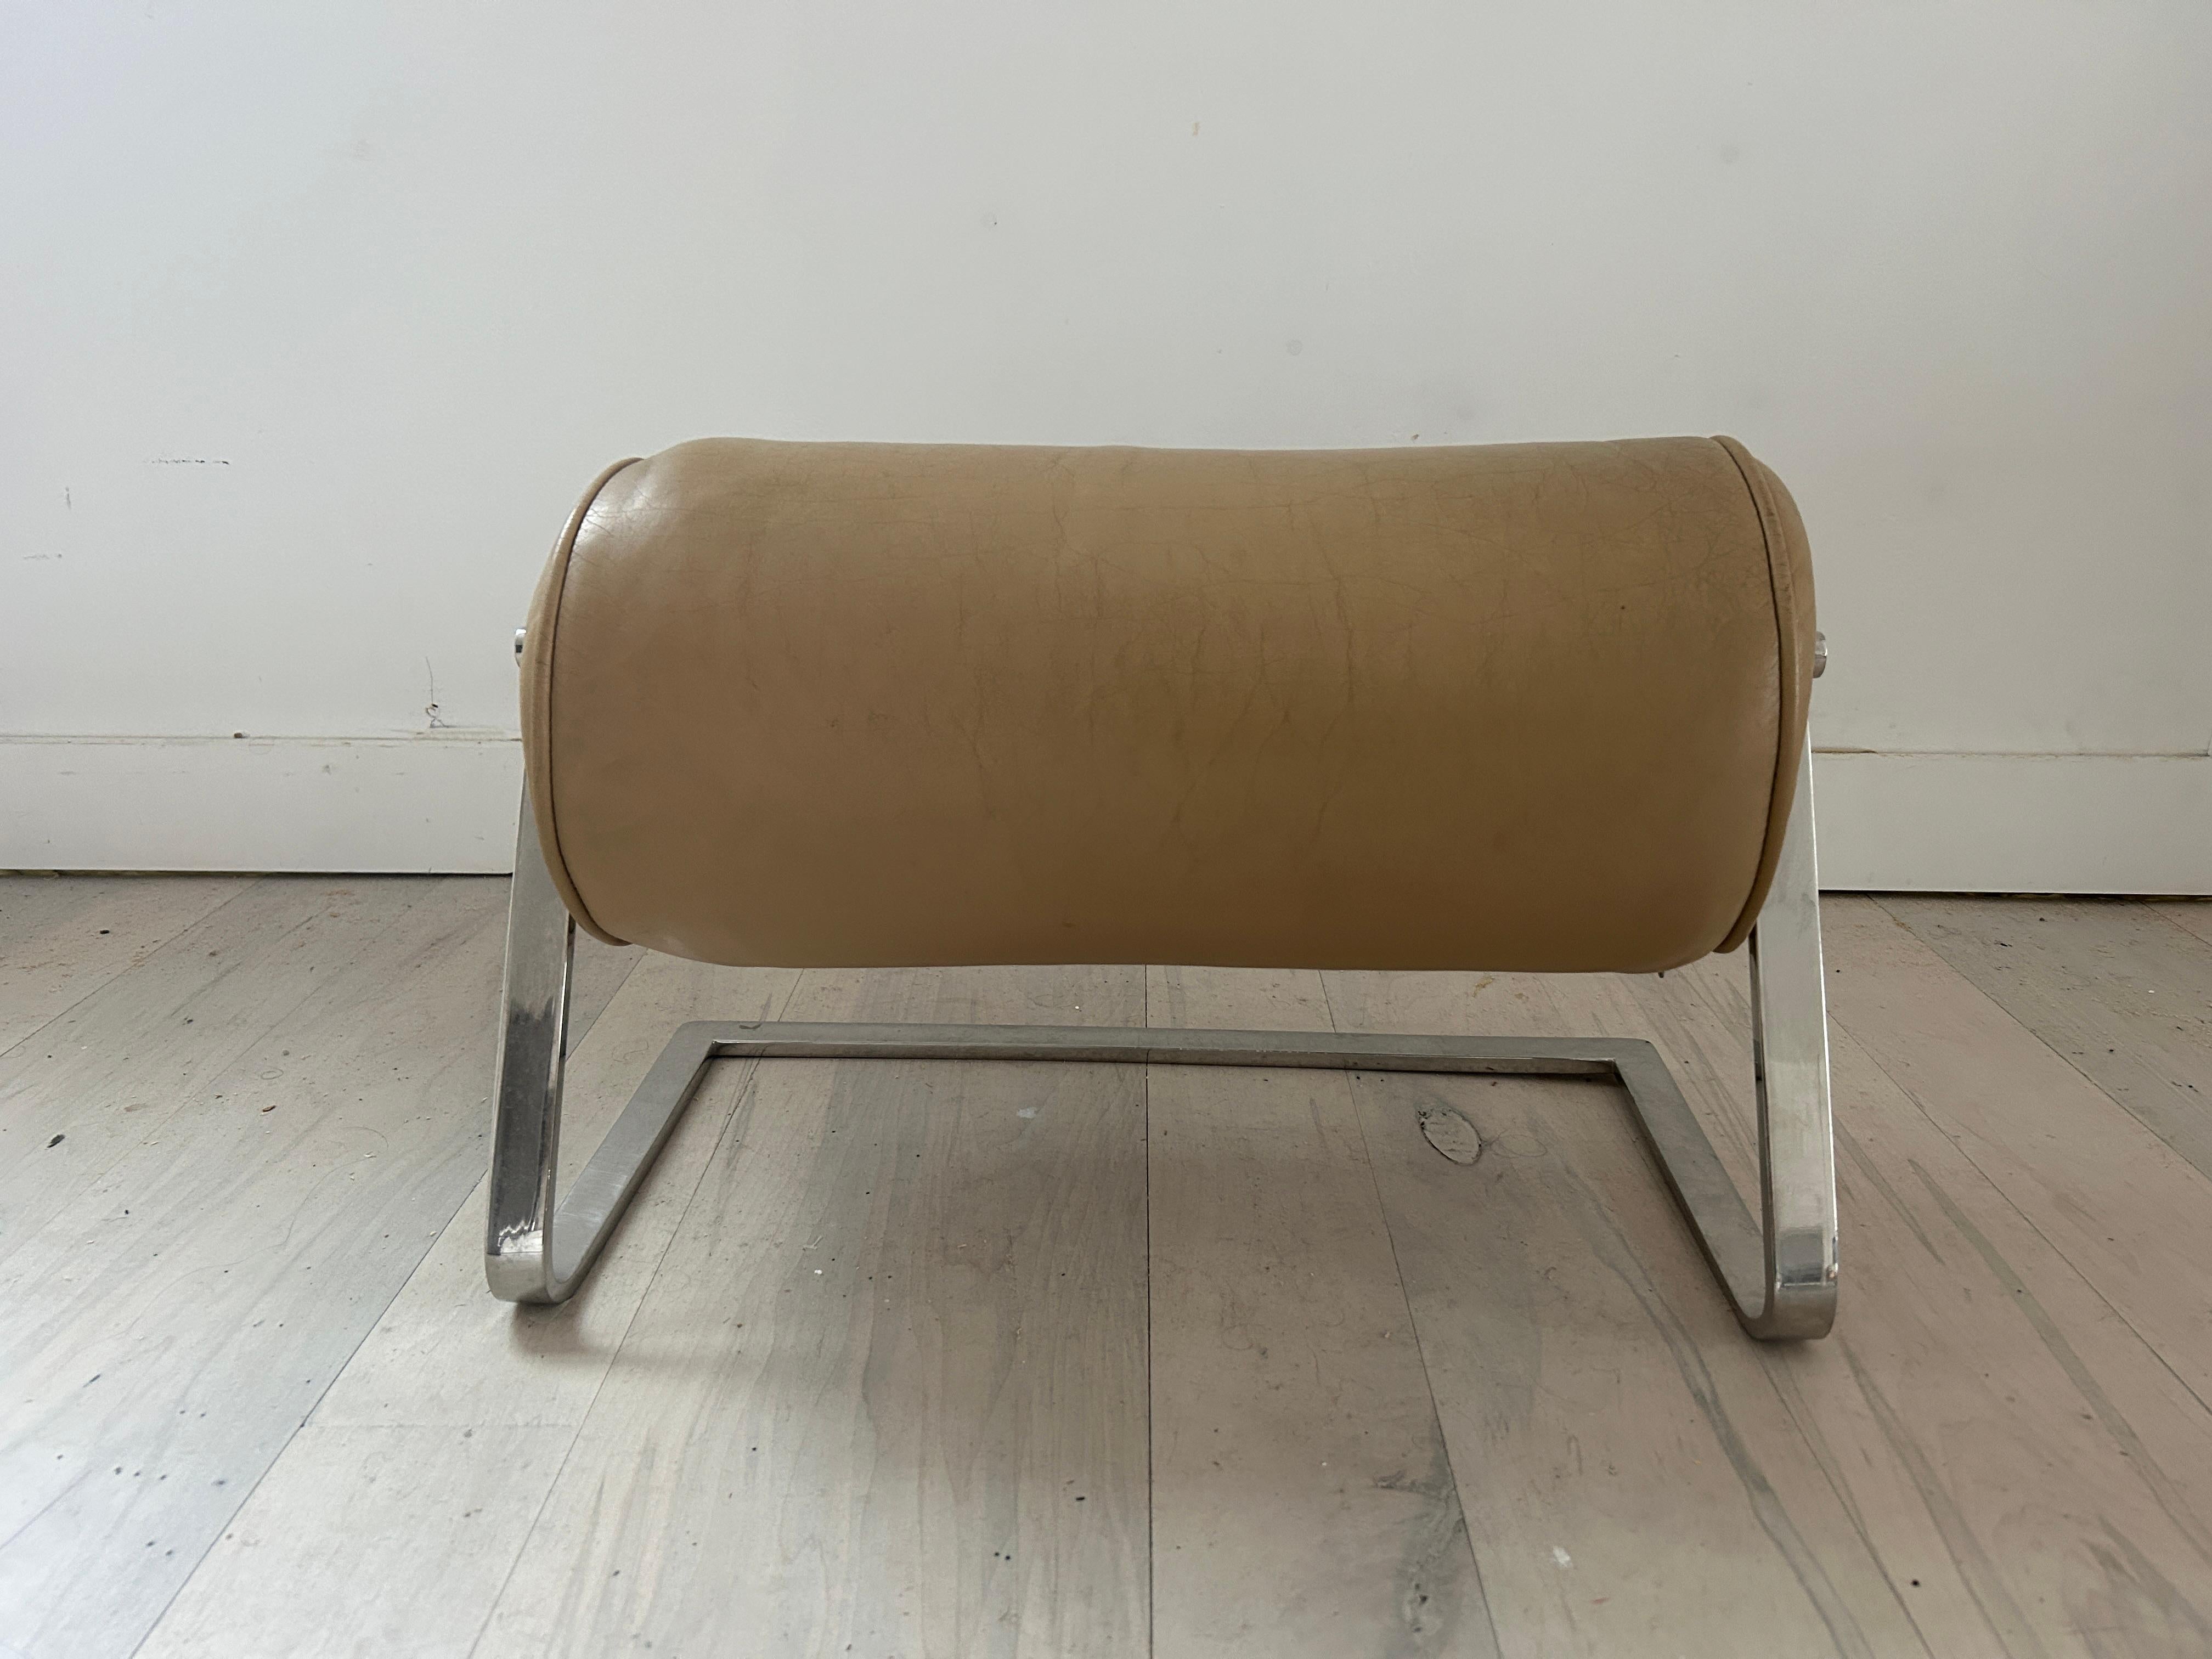 Mid-Century Modern Ward Bennett low tan leather chrome footrest stool pouf ottoman No. 1059. Great Design by Ward Bennett - Rare Foot rest made for Brickel Associates USA. Solid metal chrome frame with tan leather upholstery with Piping. Made Circa